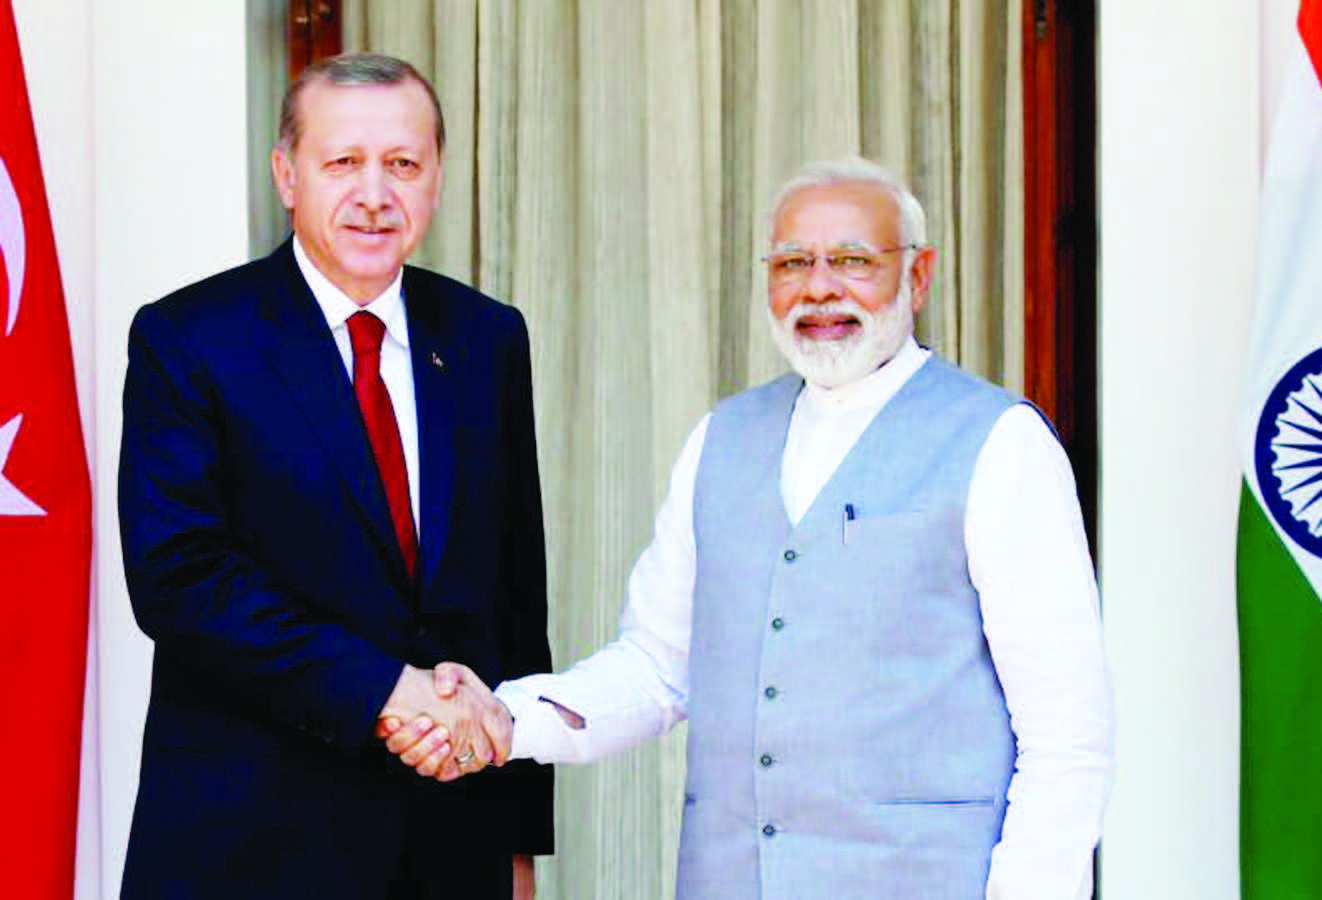 Turkish President Recep Tayyip Erdogan being welcomed by Prime Minister Narendra Modi Photo courtesy PTI